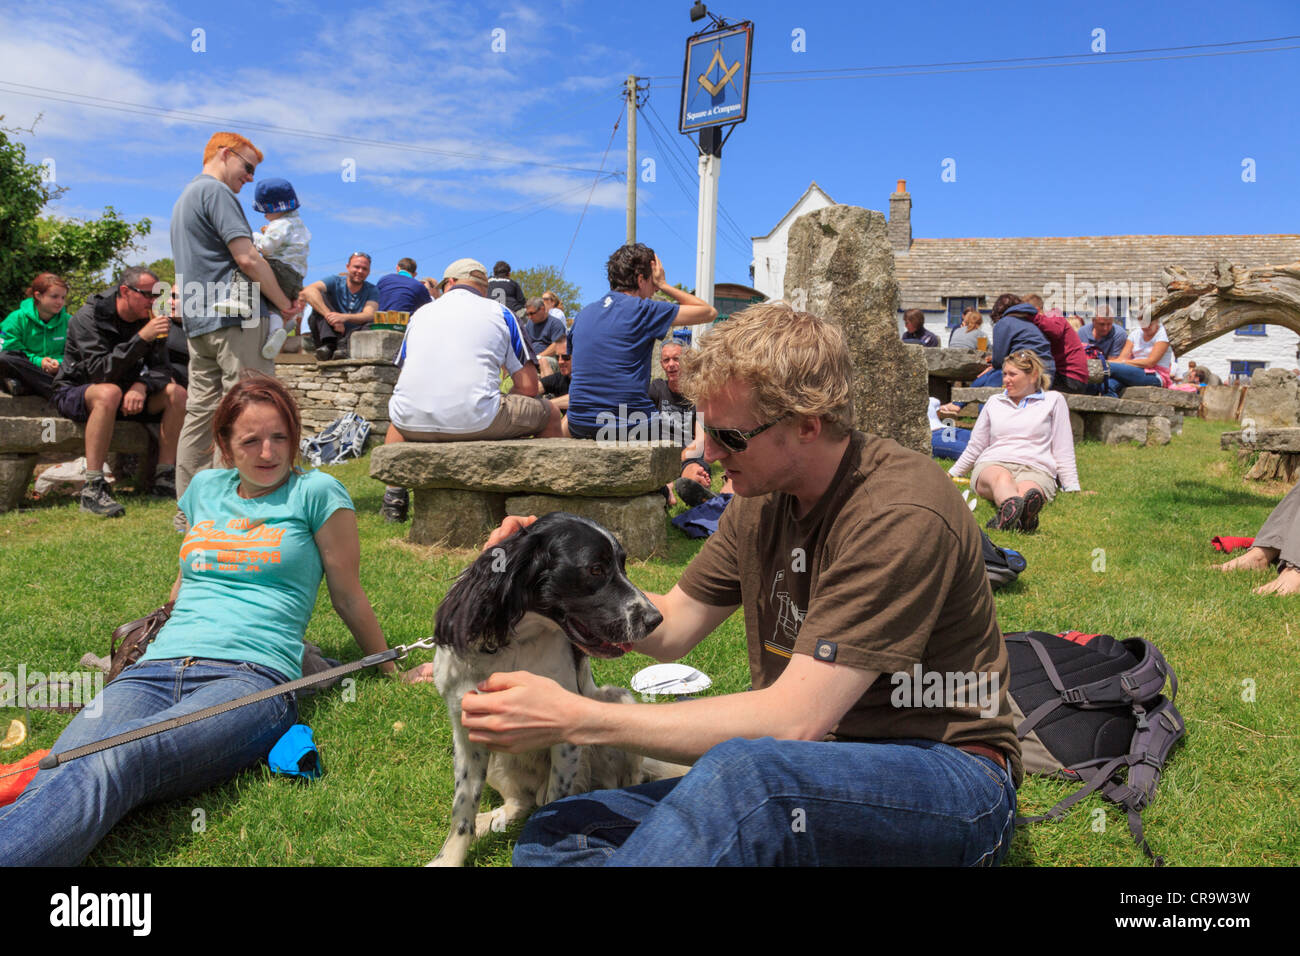 Authentic Scene With People Sitting In Busy Beer Garden Of Square